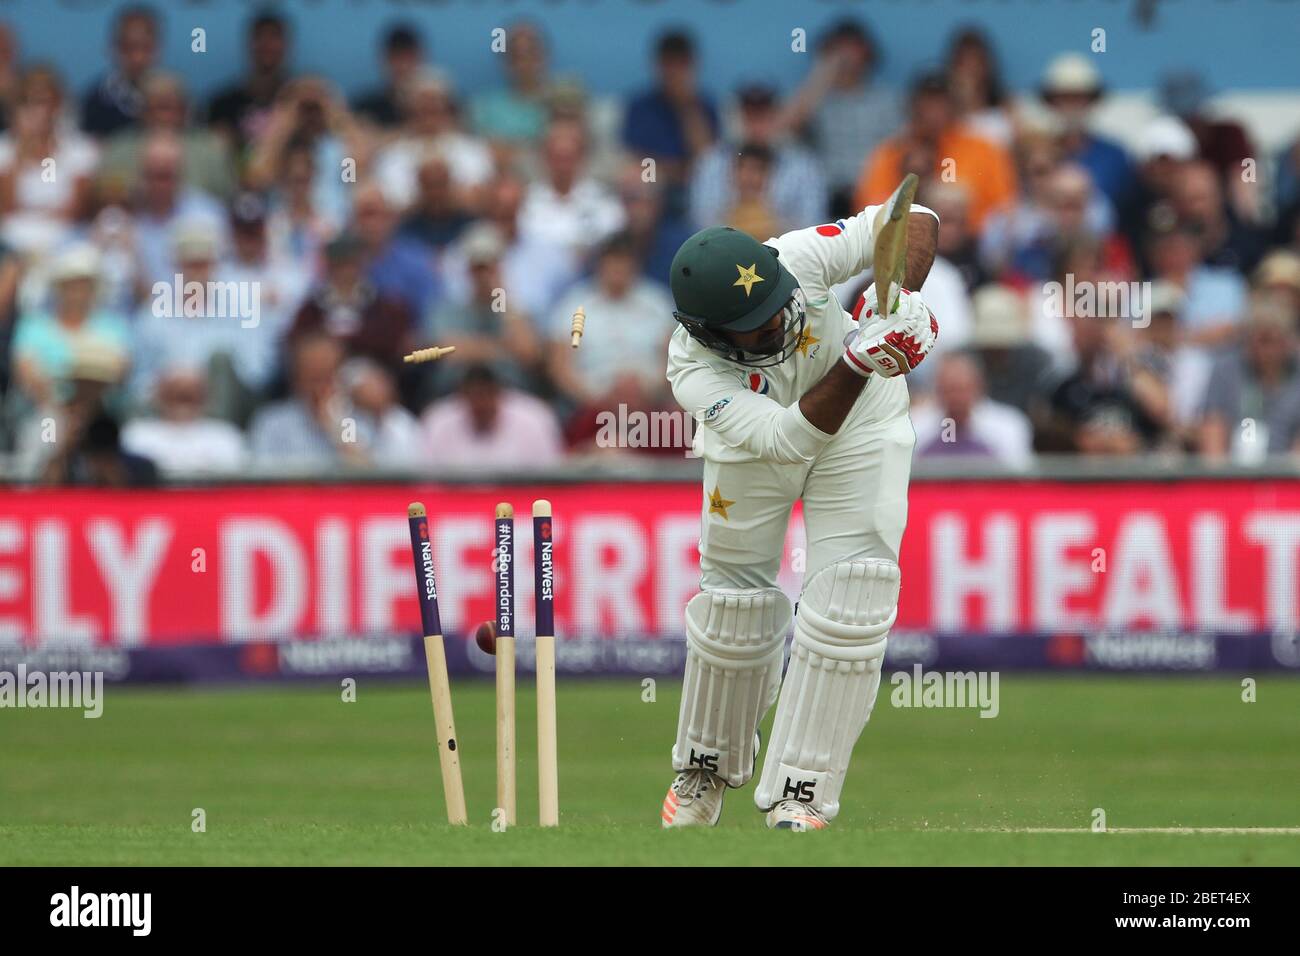 LEEDS, UK - JUNE 1ST Pakistan captain Safraz Ahmed is bowled by Jimmy Anderson during the first day of the Second Nat West Test match between England and Pakistan at Headingley Cricket Ground, Leeds on Friday 1st June 2018. (Credit: Mark Fletcher | MI News) Stock Photo